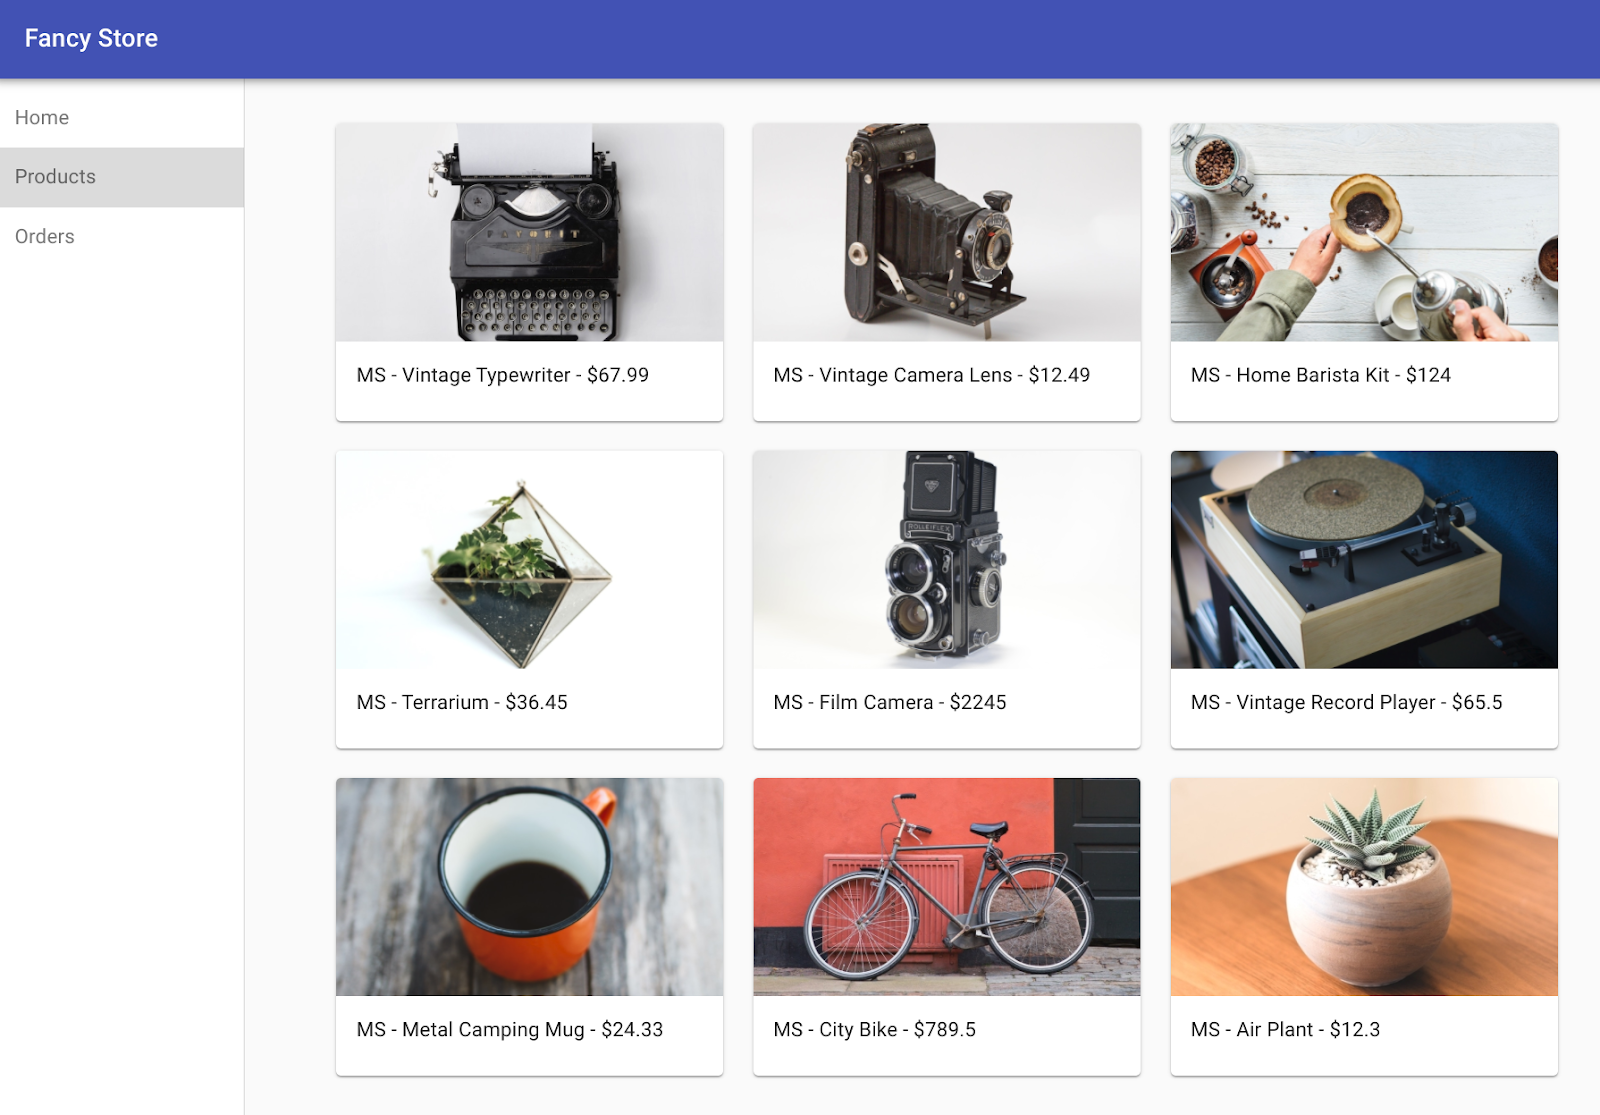 Fancy Store Products tabbed page. Product images are tiled.